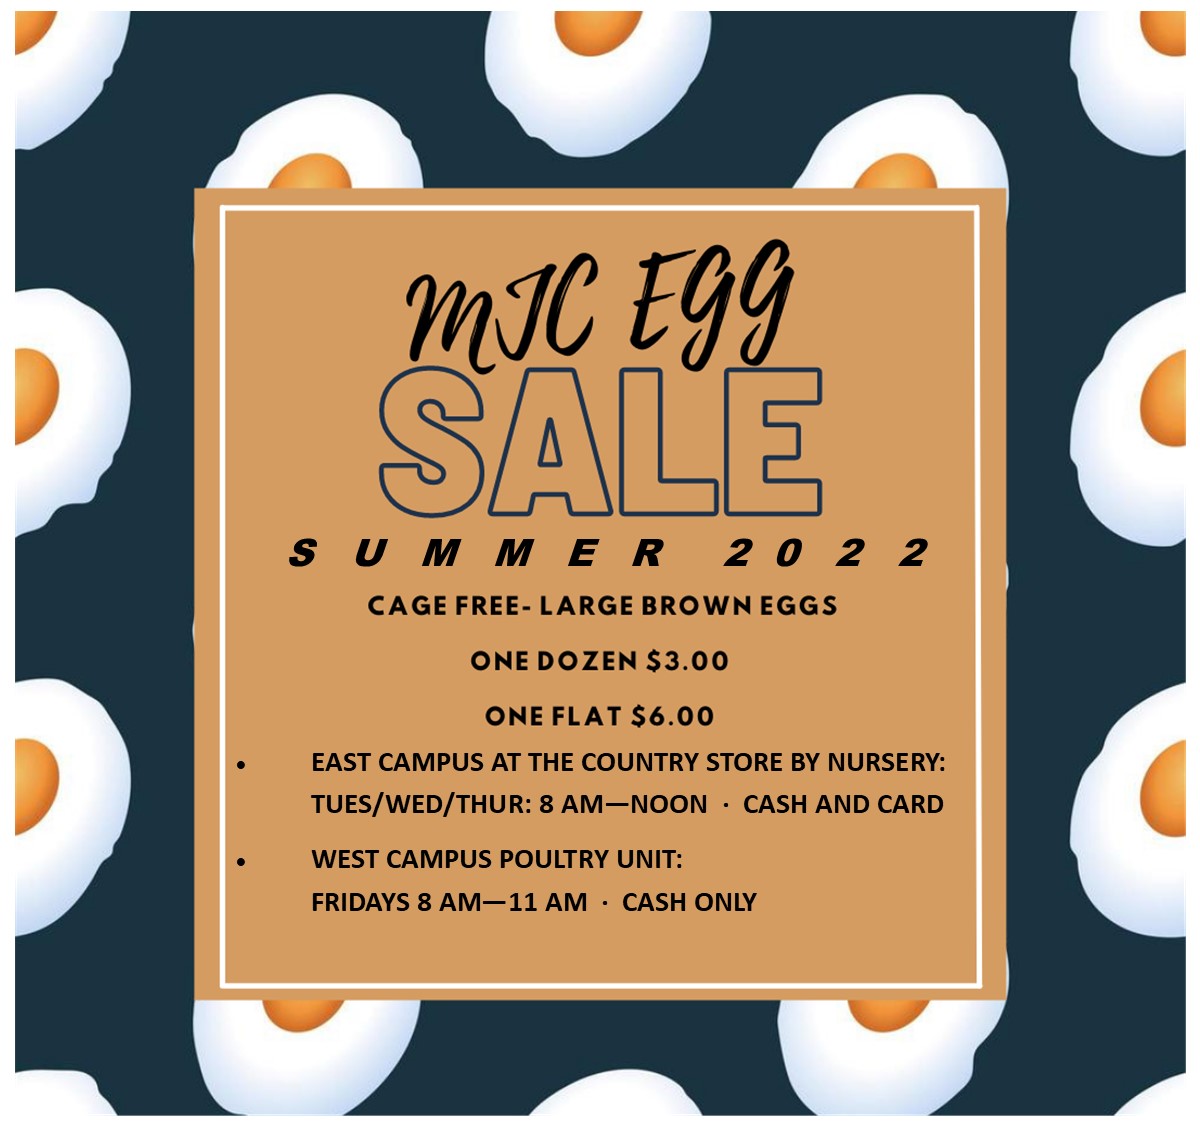 Summer 2022 Egg Sales. One Dozen $3. One flat $6. East Campus Country Store Tuesday through Thursday 8am to noon. Cash and card. West Campus Poultry Unit Fridays 8am - 11am. Cash only.